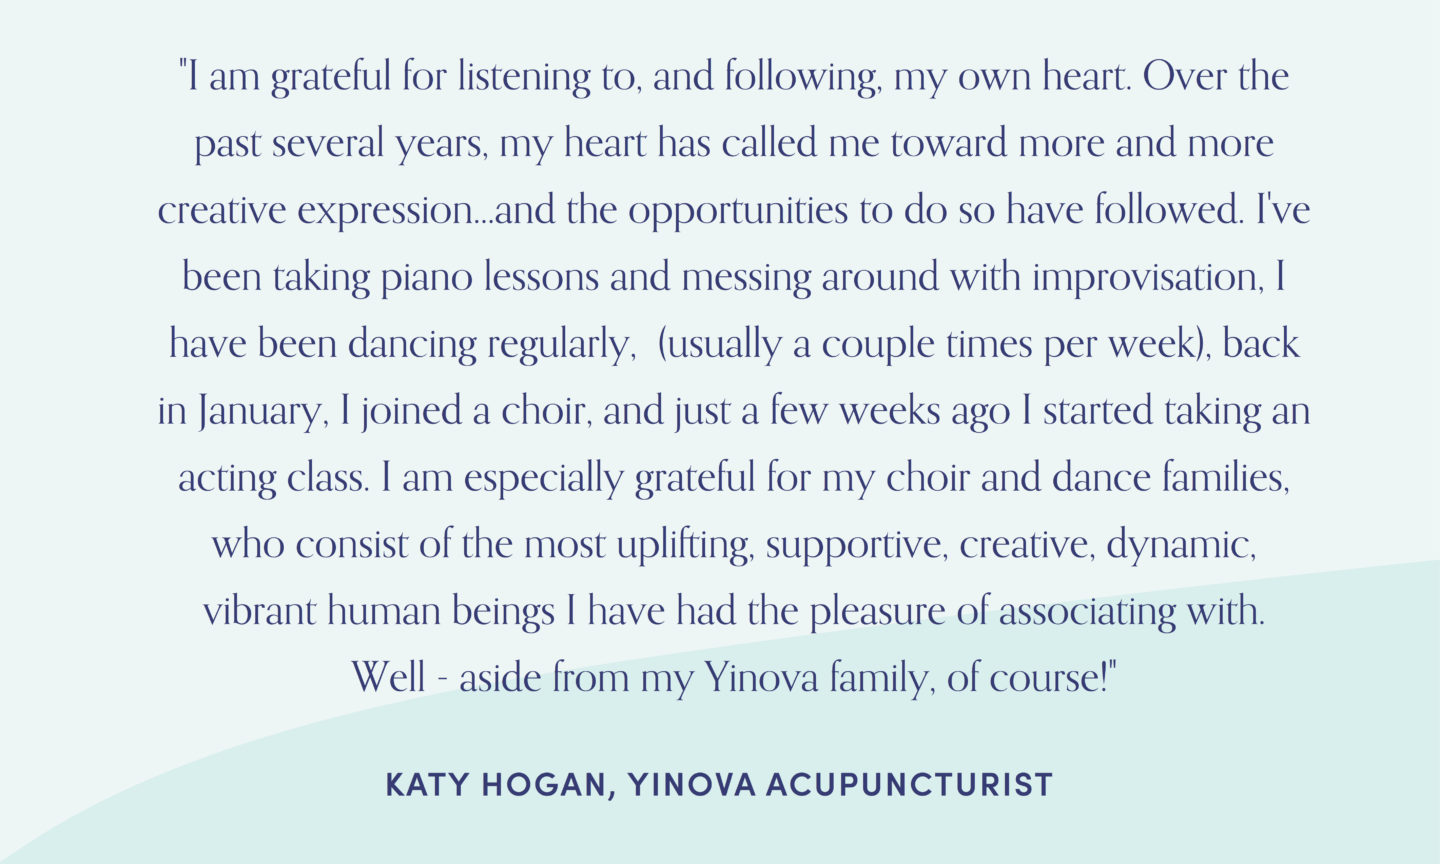 Quote from acupuncturist, Katy Hogan: "I am grateful for listening to, and following, my own heart. Over the past several years, my heart has called me toward more and more creative expression...and the opportunities to do so have followed. I've been taking piano lessons and messing around with improvisation, I have been dancing regularly, (usually a couple times per week), back in January, I joined a choir, and just a few weeks ago I started taking an acting class. I am especially grateful for my choir and dance families, who consist of the most uplifting, supportive, creative, dynamic, vibrant human beings I have had the pleasure of associating with. Well - aside from my Yinova family, of course!"